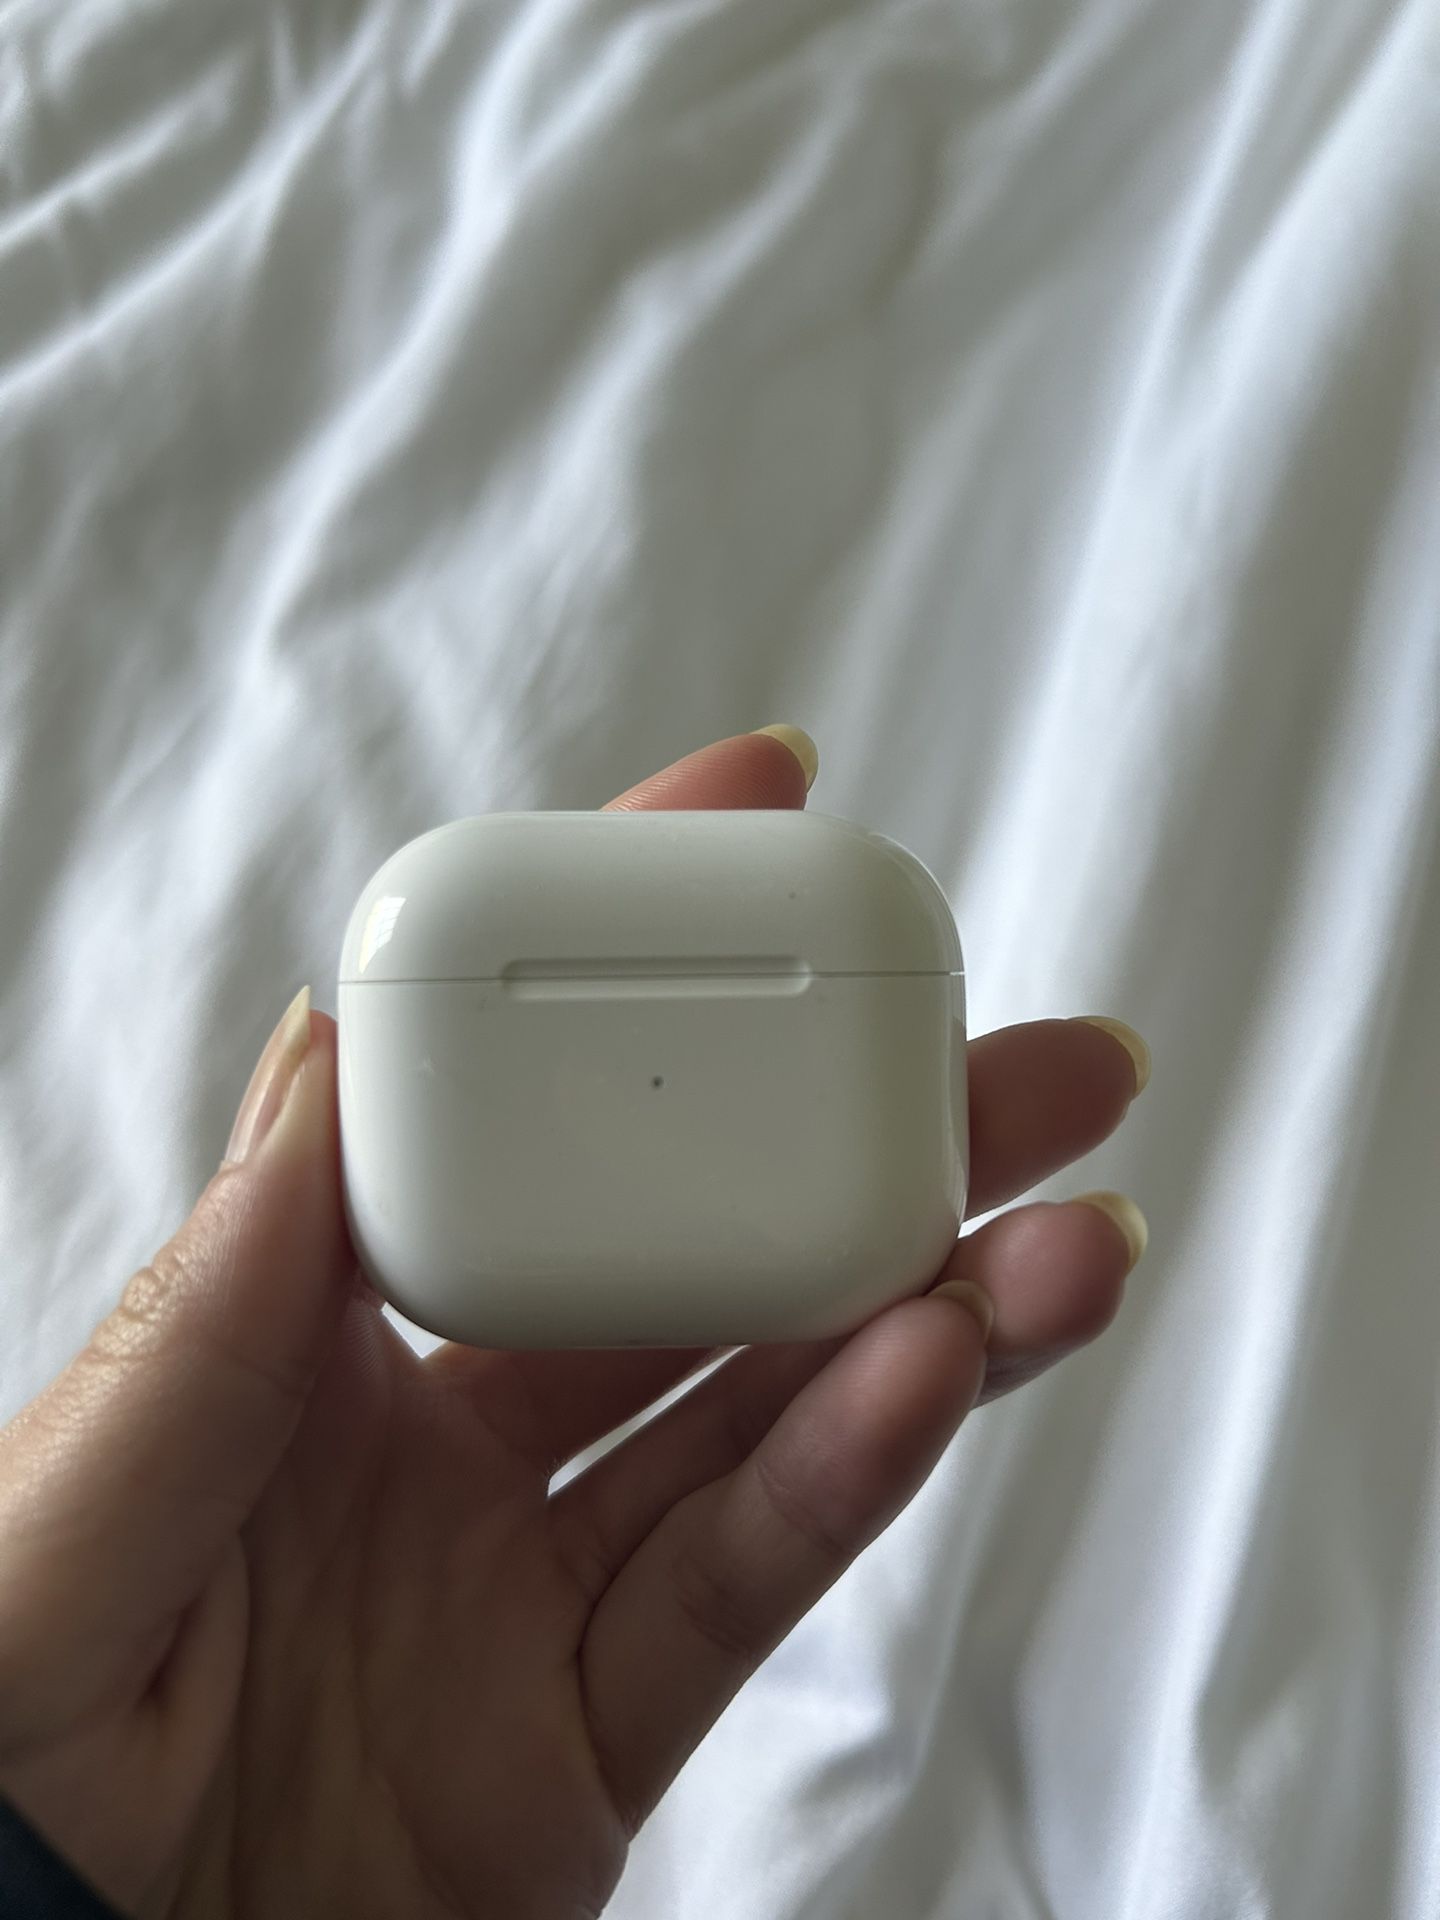 3rd Generation AirPod Case